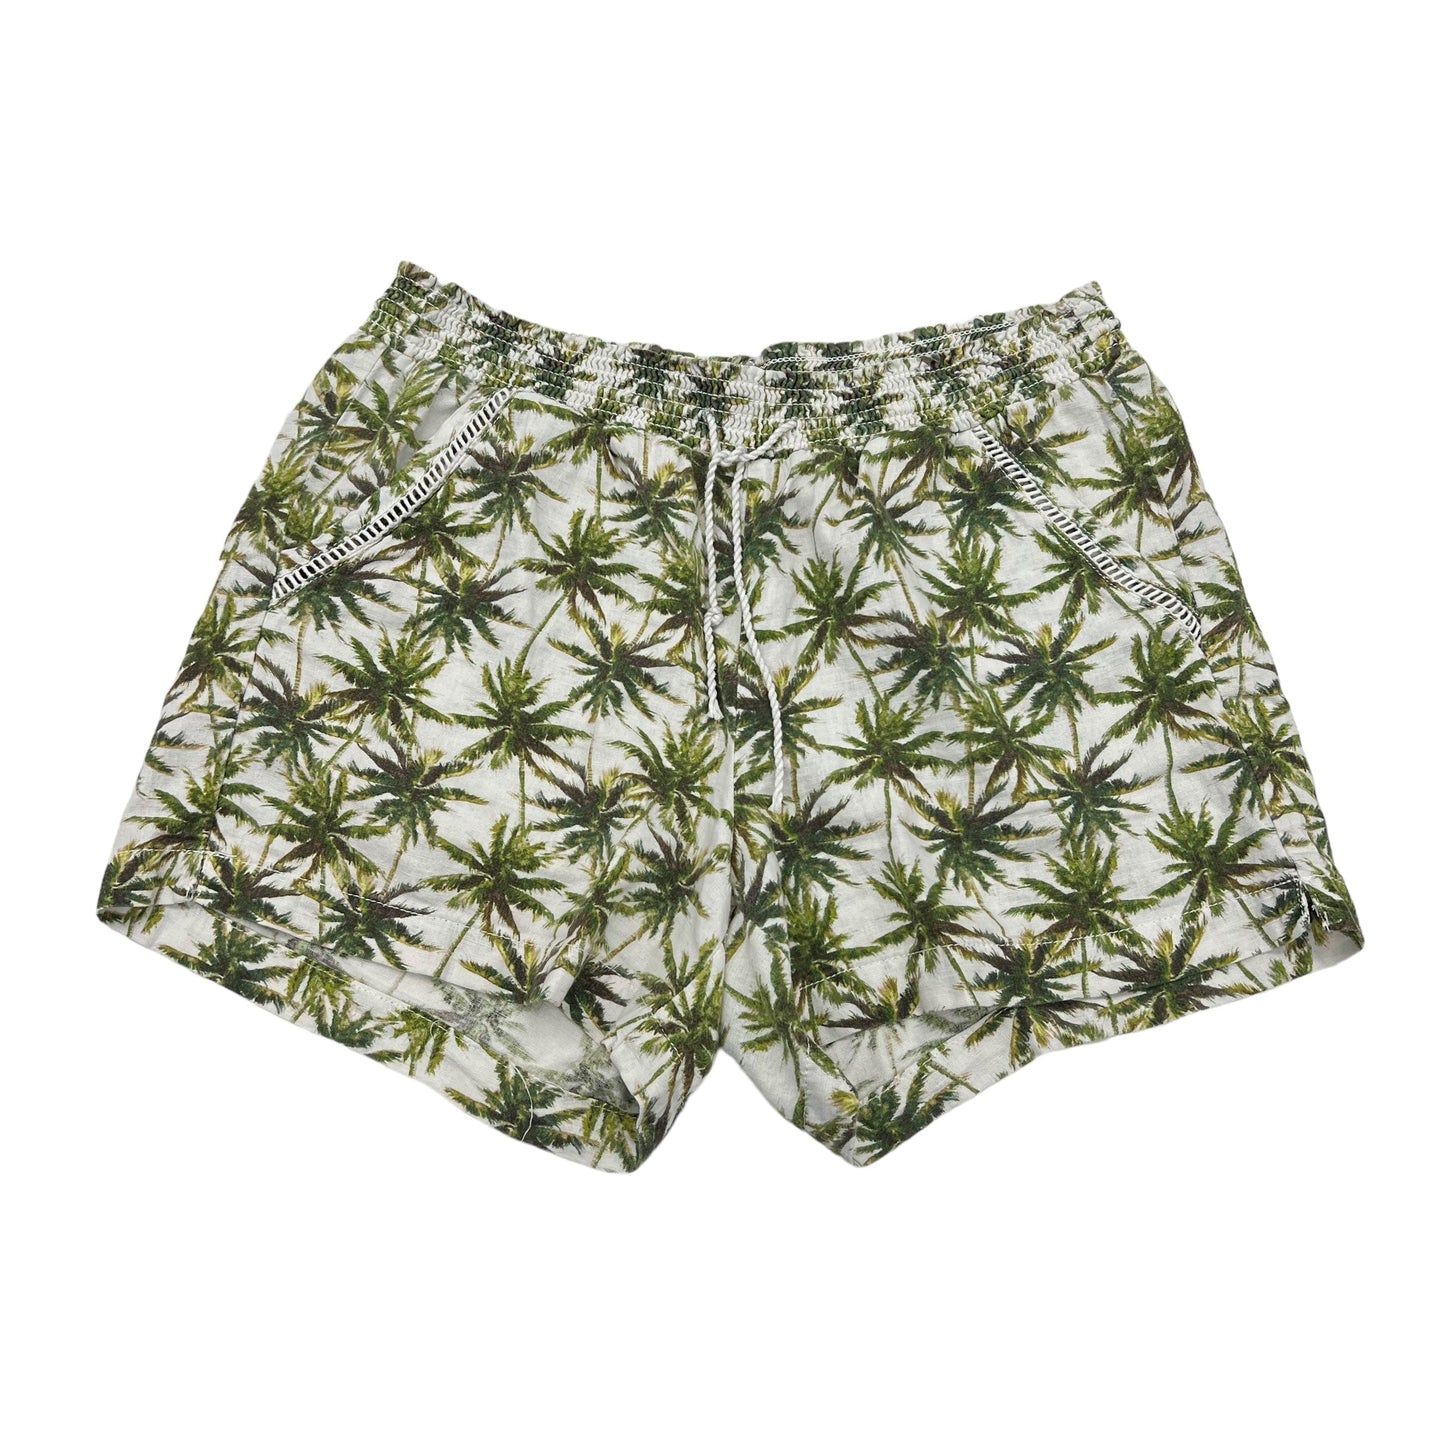 GREEN SHORTS by BRIGGS Size:L